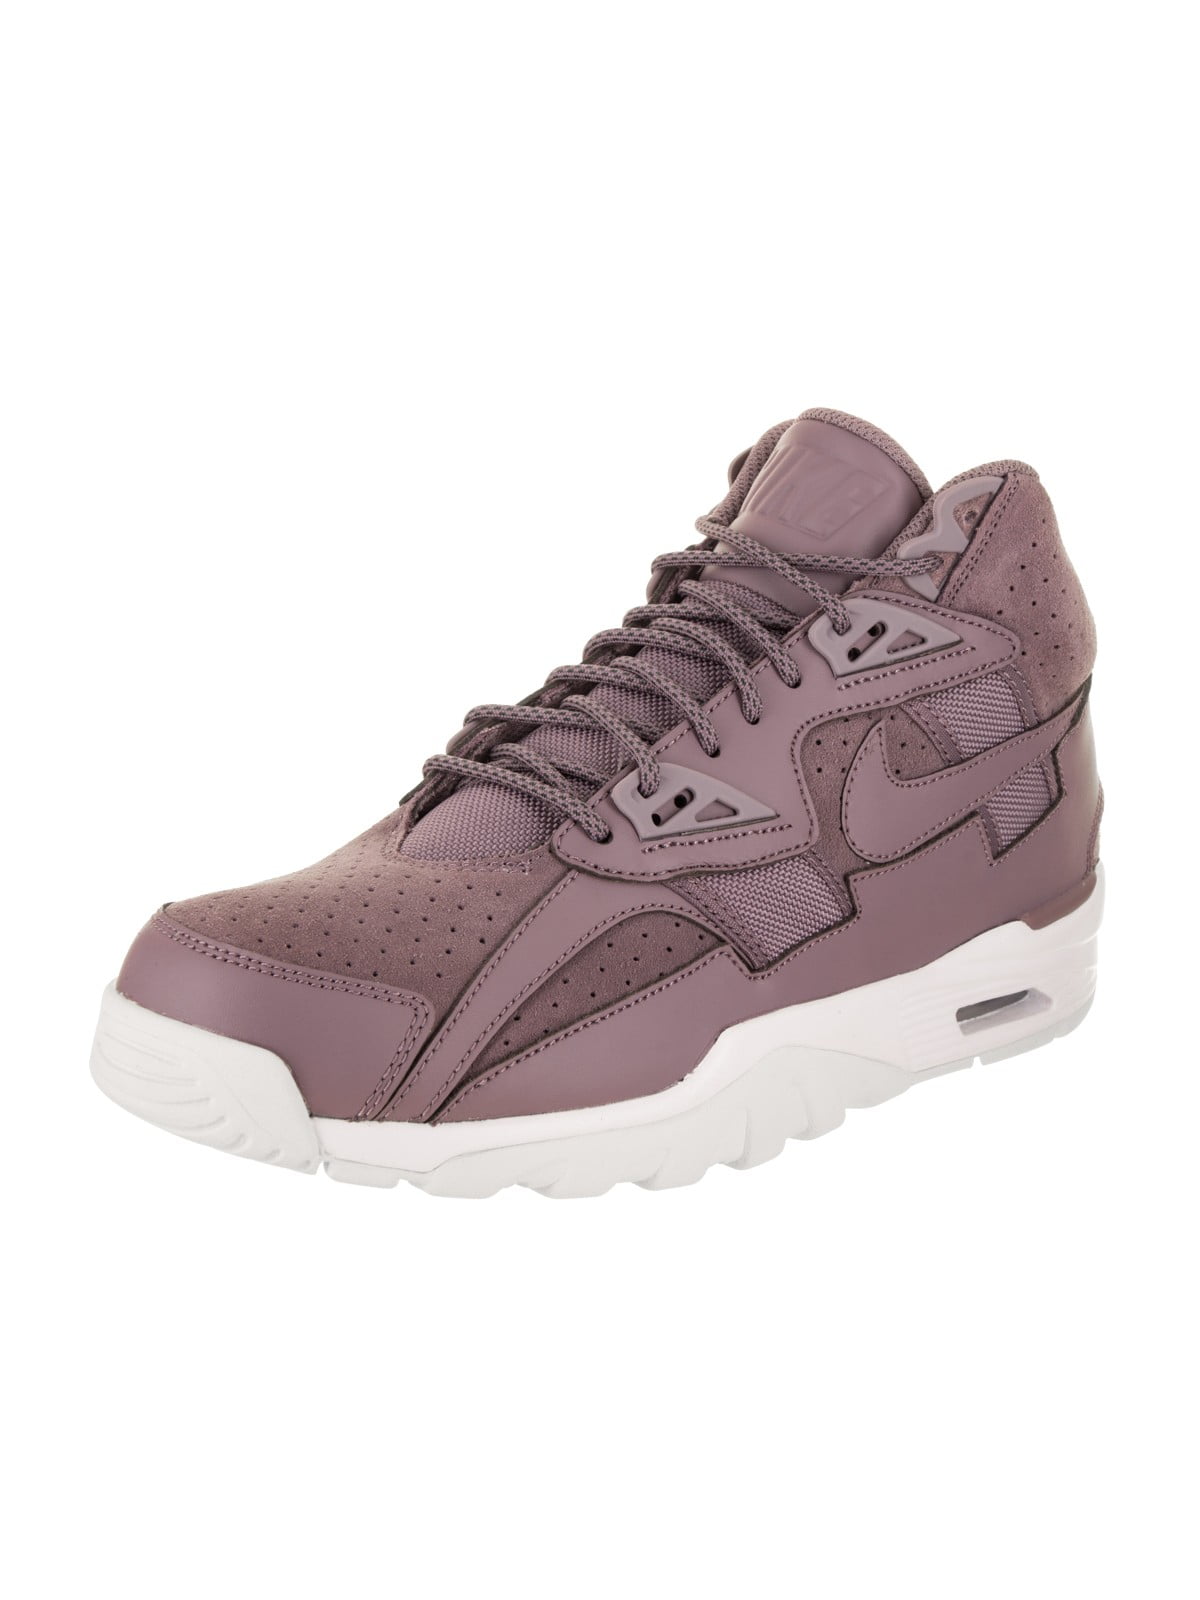 nike air trainer sc training shoes